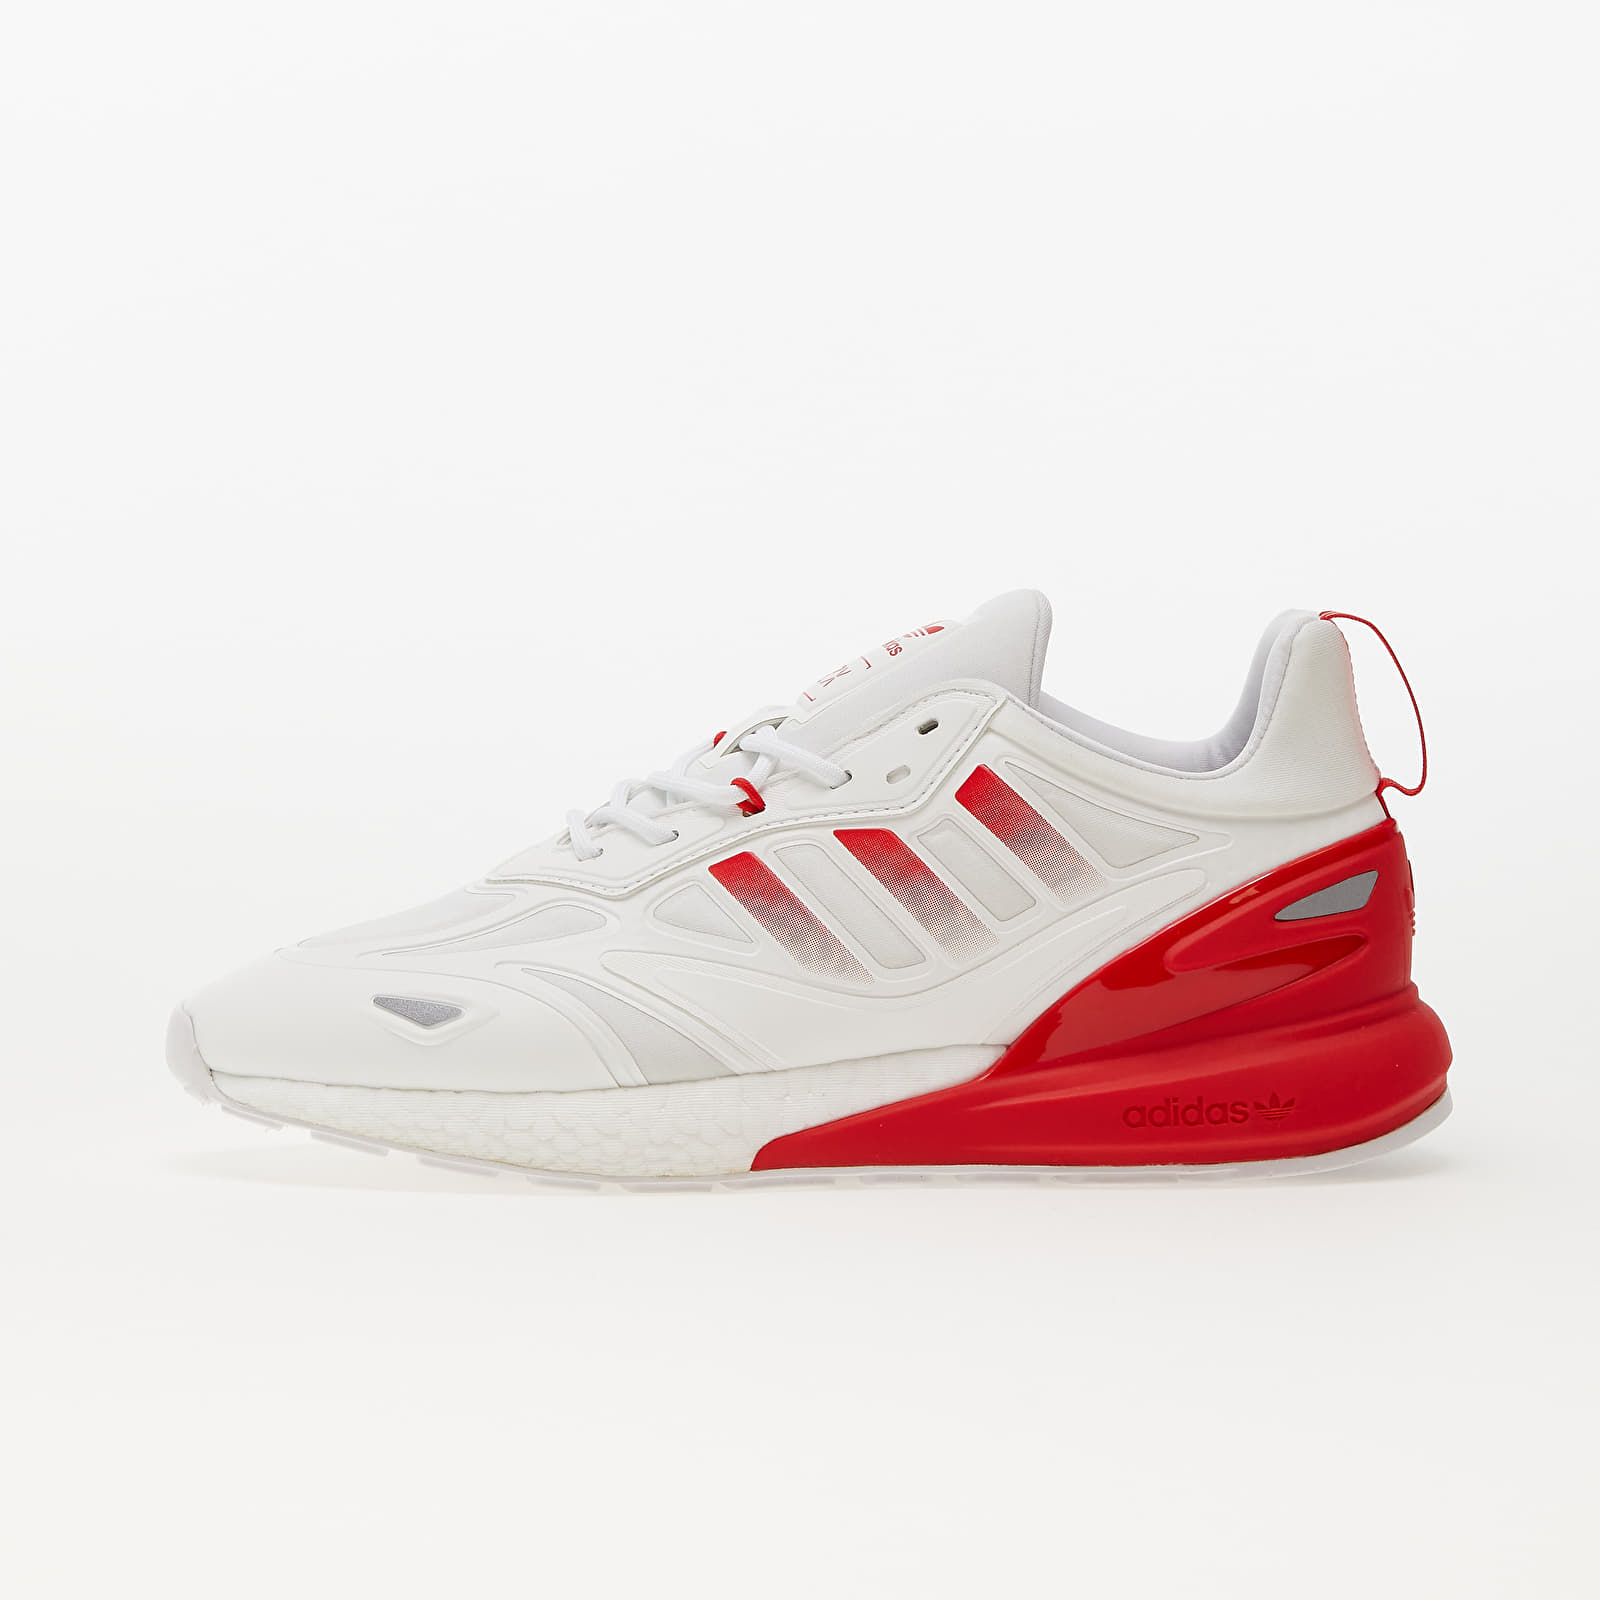 Men's sneakers and shoes adidas Originals ZX 2K BOOST 2.0 Ftw White/ Silver Metalic/ Vivid Red